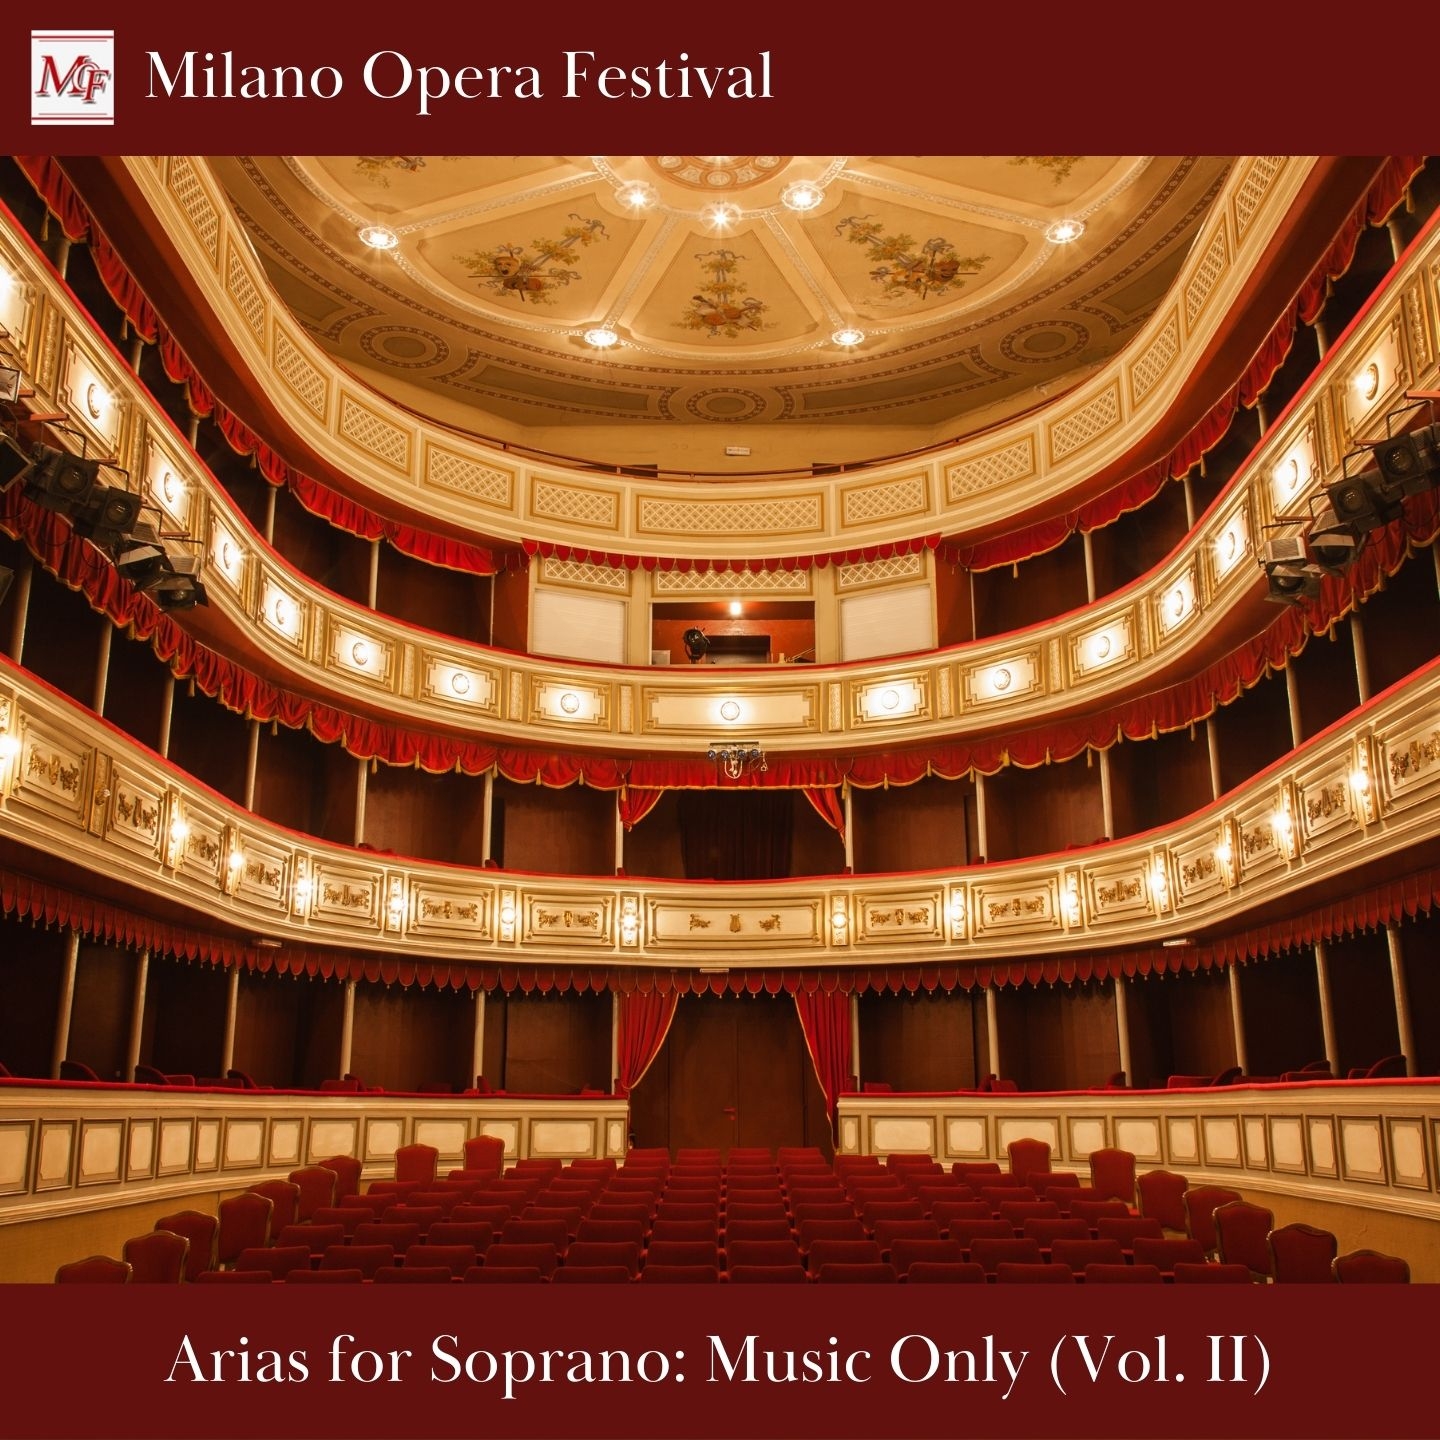 Arias for Soprano: Music Only Vol. II